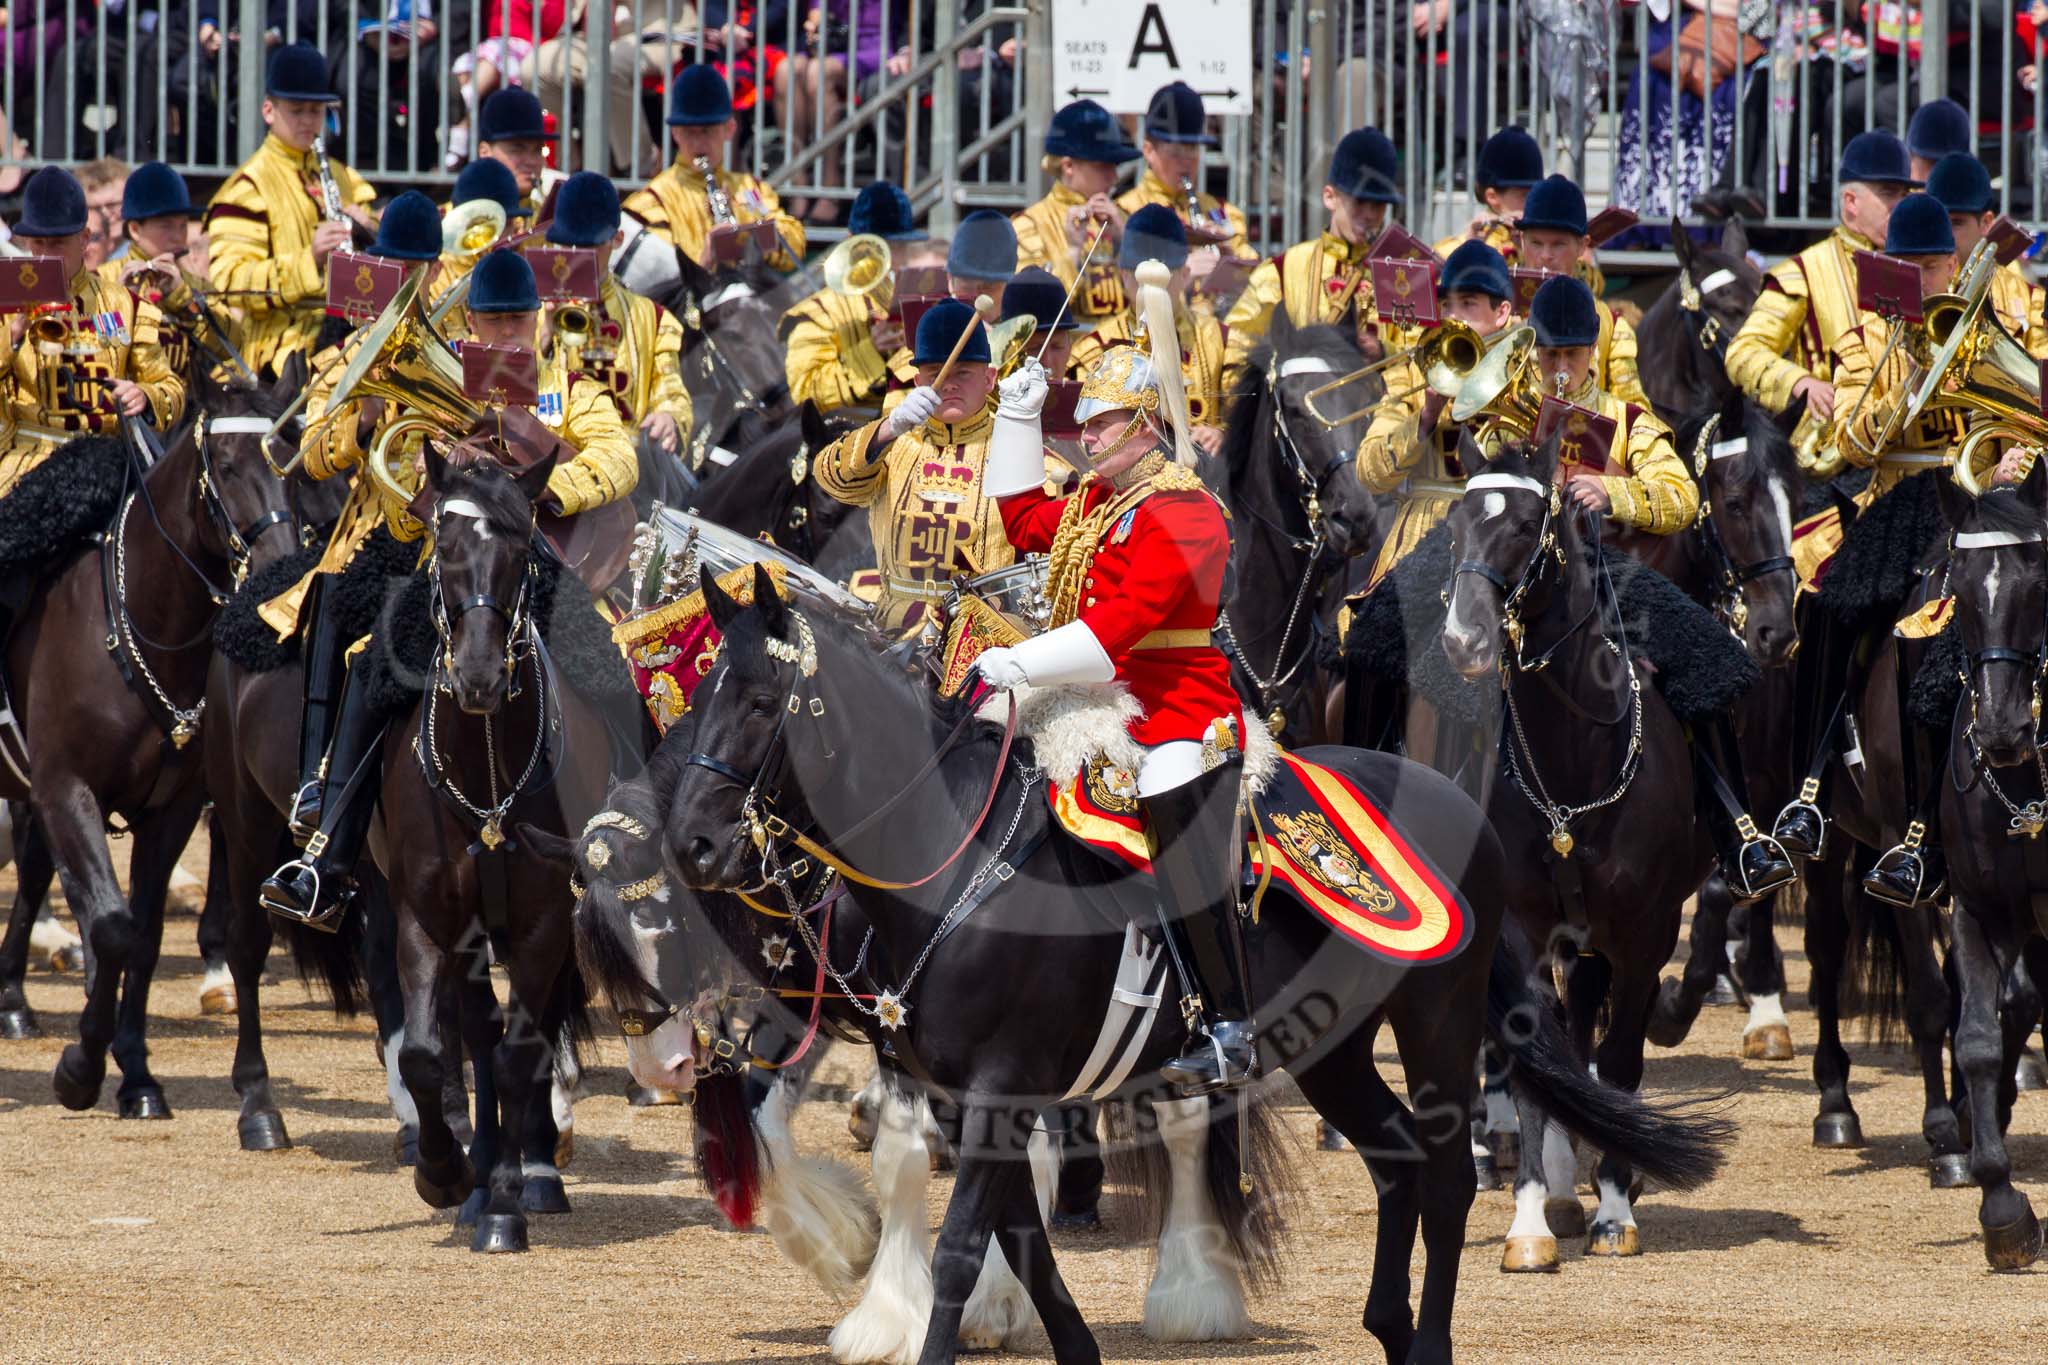 Trooping the Colour 2011: The Mounted Bands of the Household Cavalry moving onto the parade ground.   In red Major K L Davies, The Life Guards, Director of Music, on his right one of the two kettle drummers..
Horse Guards Parade, Westminster,
London SW1,
Greater London,
United Kingdom,
on 11 June 2011 at 11:53, image #316